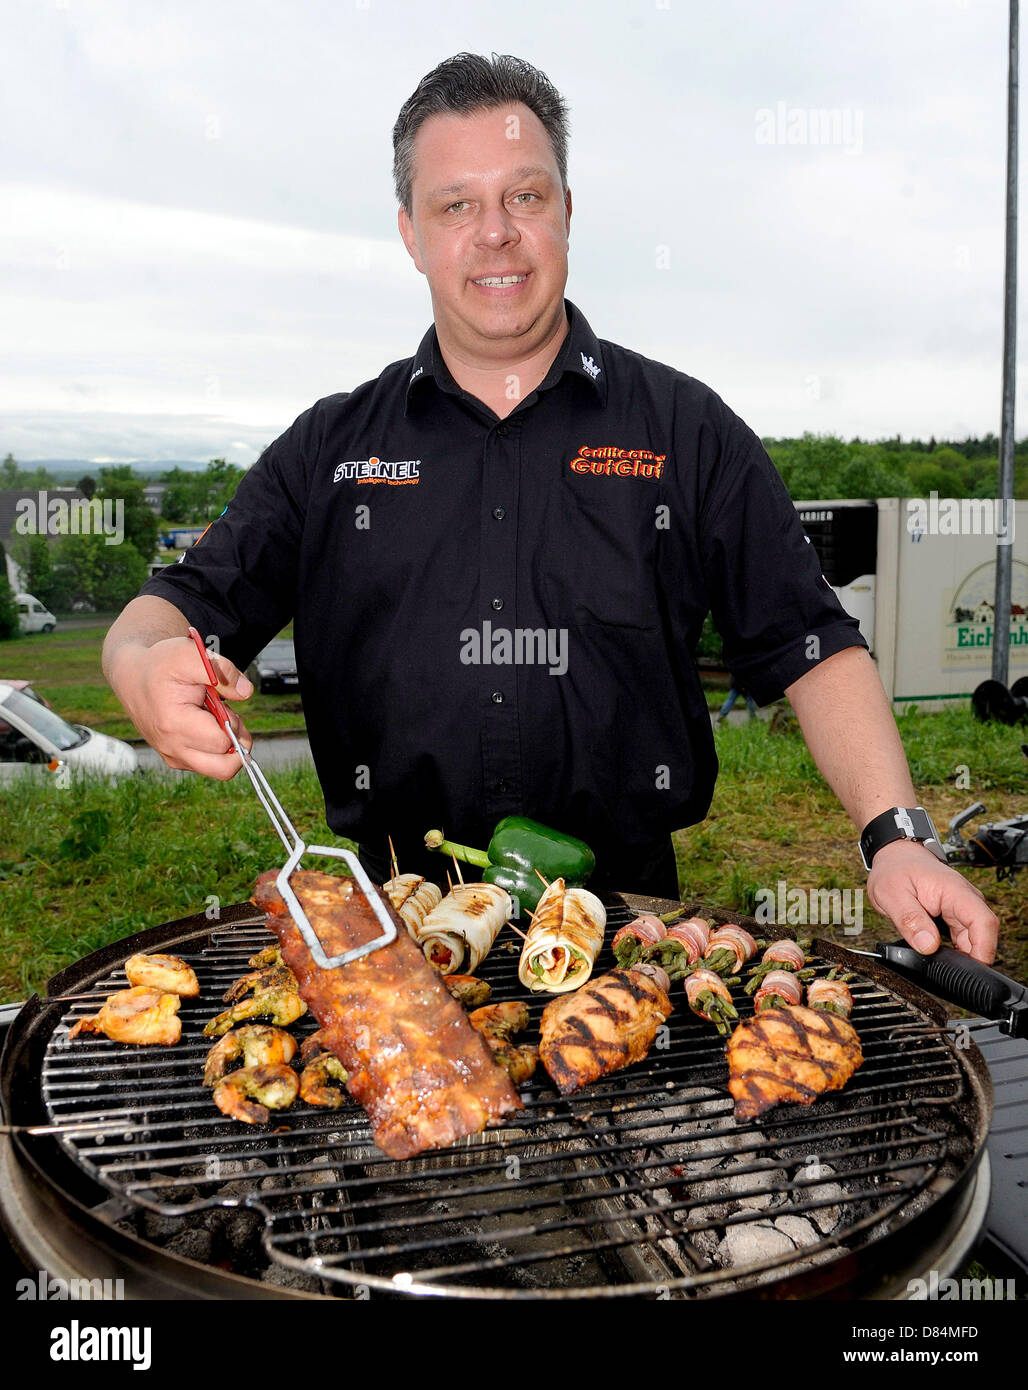 Michael Hoffmann, team boss of Grillteam Gut Glut e.V., presents spare ribs on his grill during the 18th German grill championship in Goeppingen, Germany, 19 May 2013. Hoffman succeeds in defending his championship title from former year, among 32 other teams. PHOTO: DANIEL MAURER Stock Photo